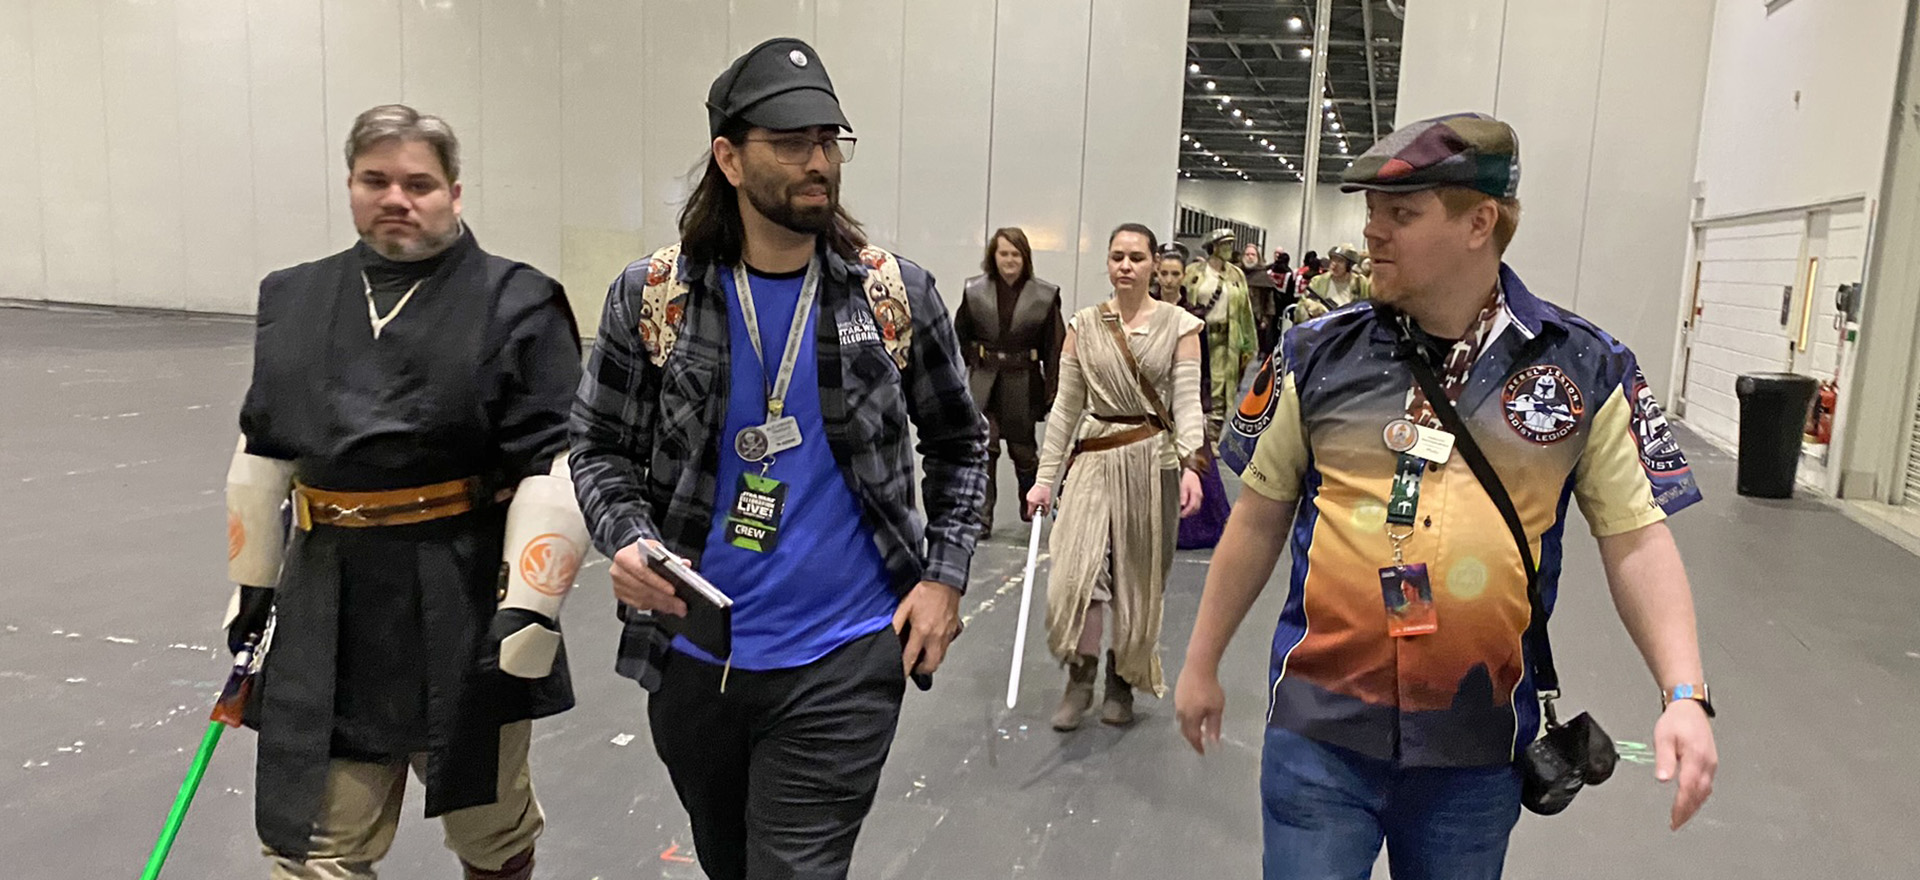 Alex Vargas and members of the Rebel Legion prepare to escort fans through London's ExCel